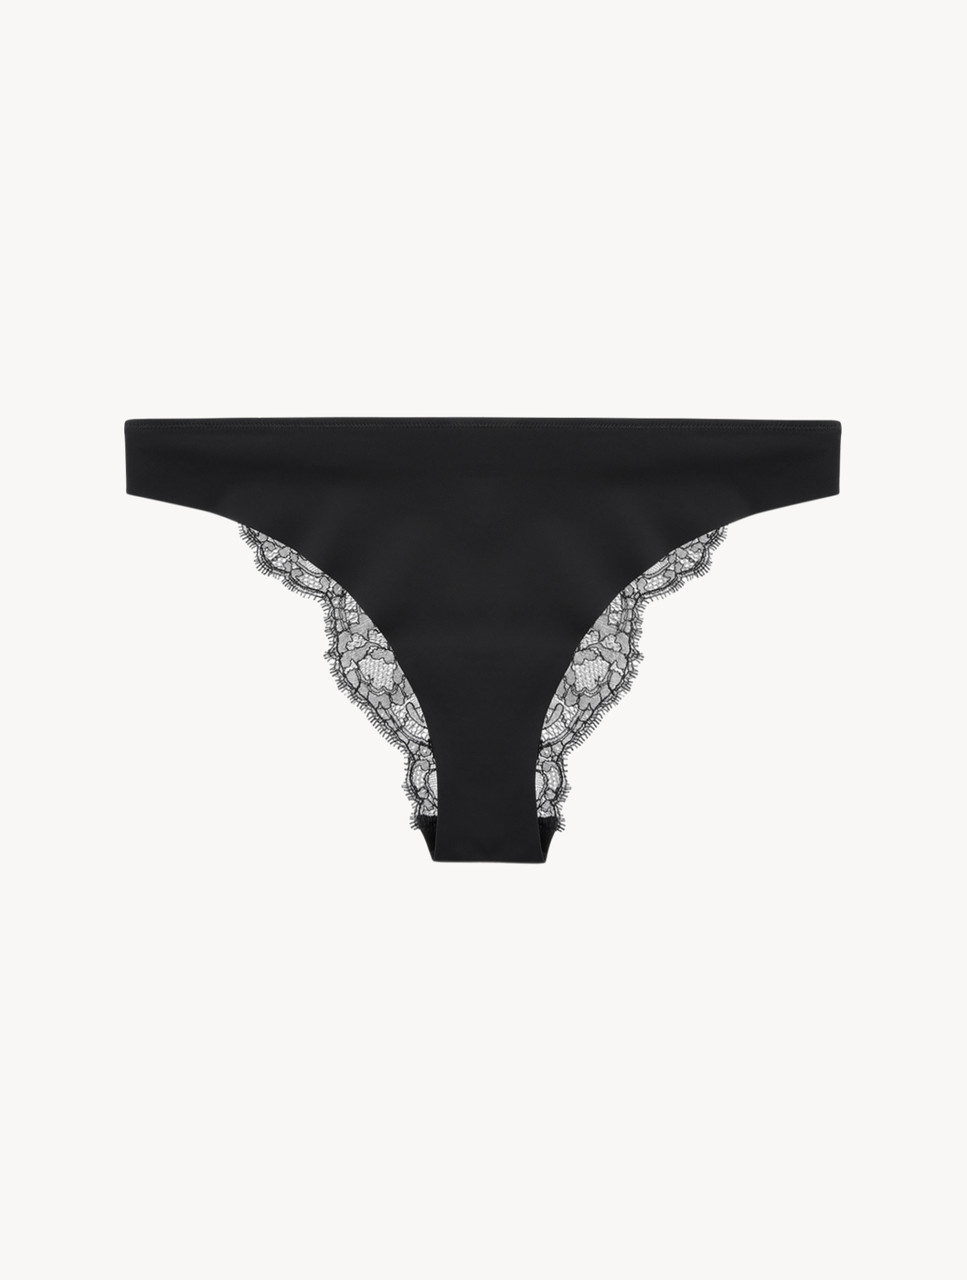 Black Brazilian brief with Chantilly lace